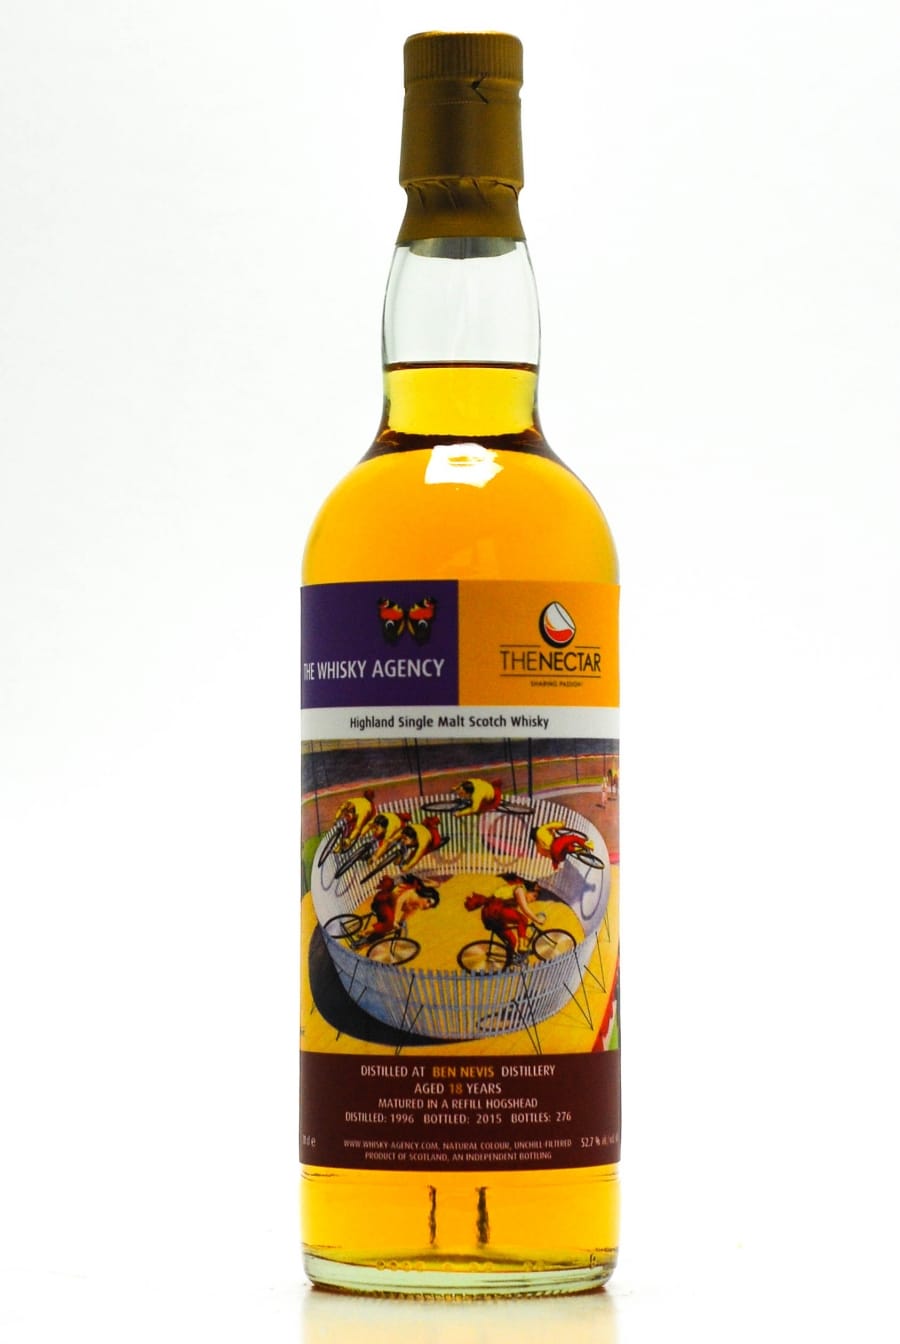 Ben Nevis - Ben Nevis 18 Years Old The Whisky Agency Circus botteling Serie Joint bottling with The Nectar 1 Of 276 Bottles 52.7% 1996